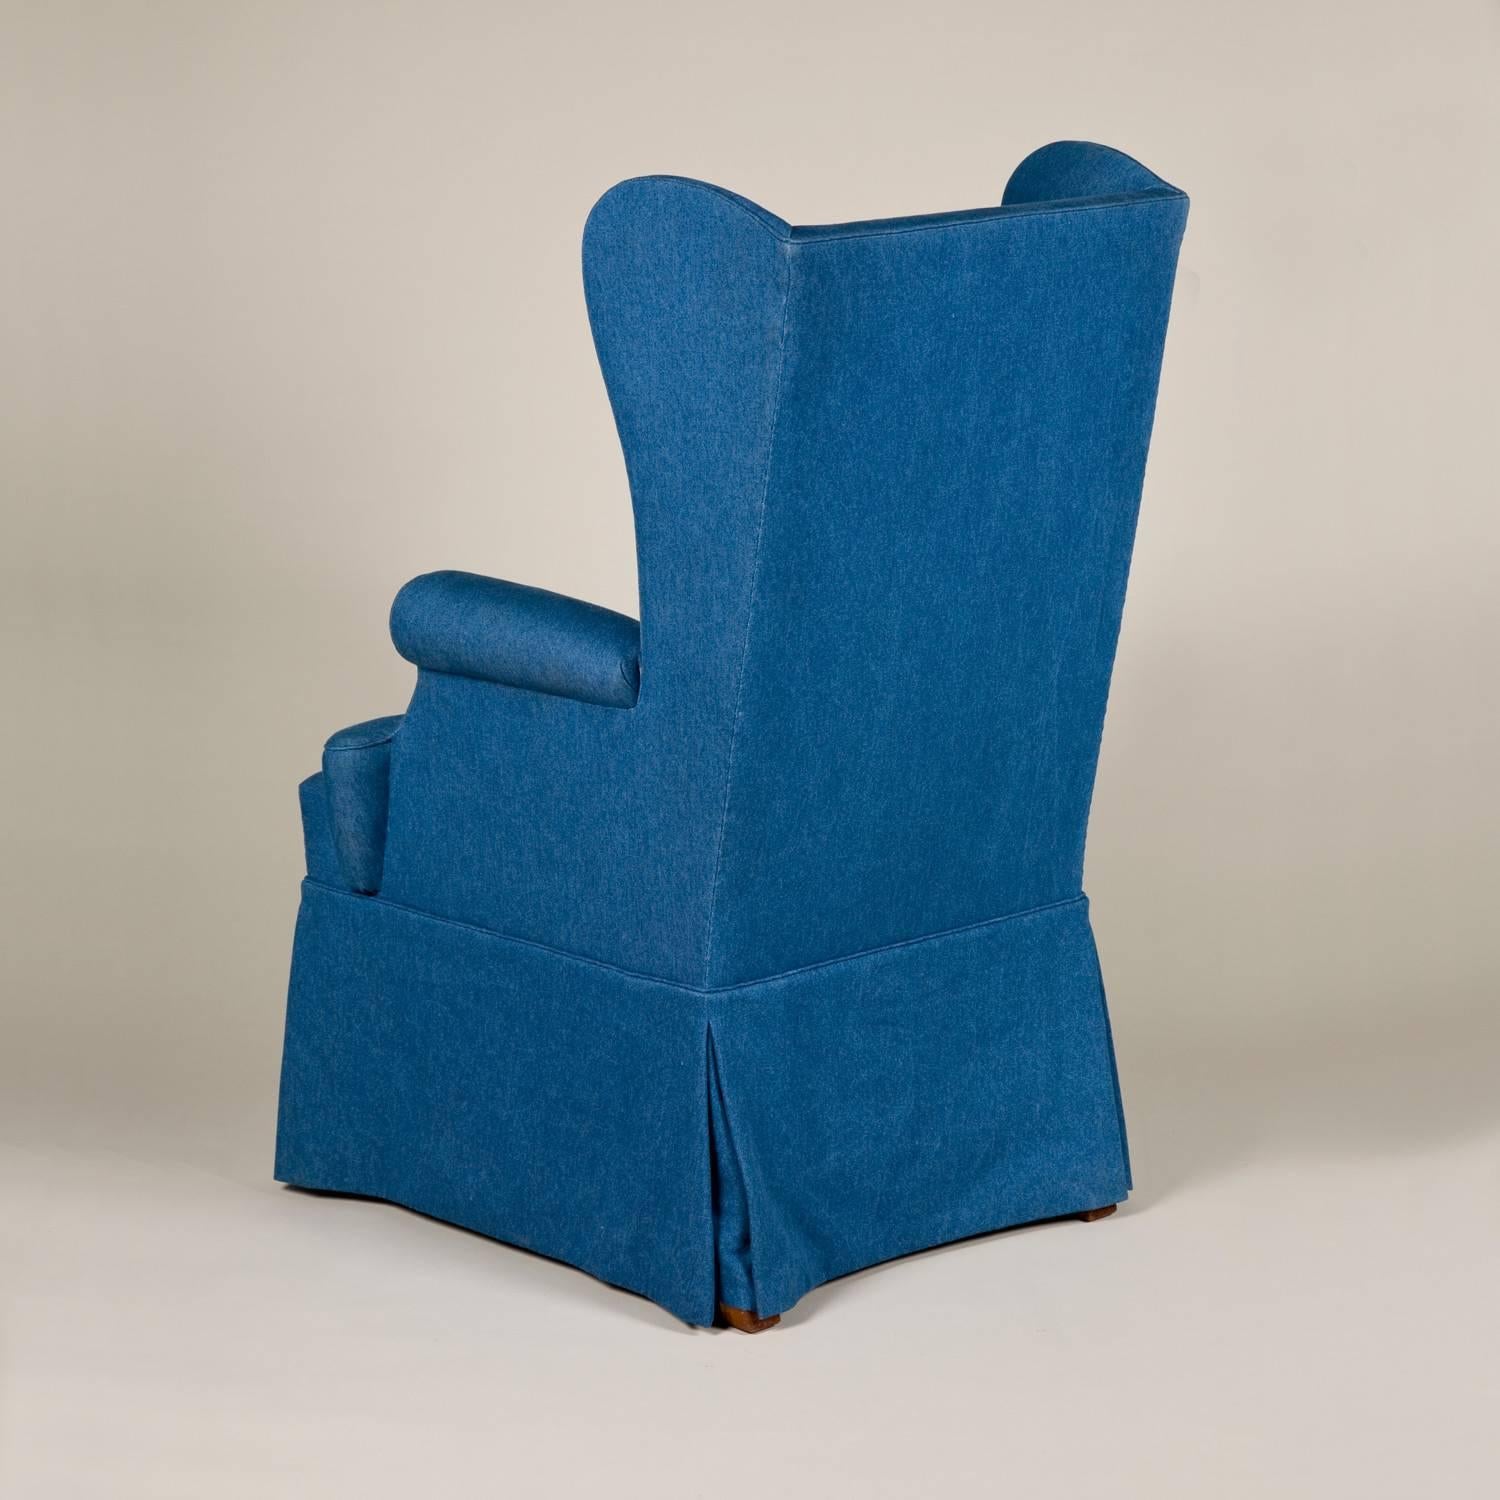 A Lancaster wing armchair. Made to order £8,100.00 plus vat, plus fabric.